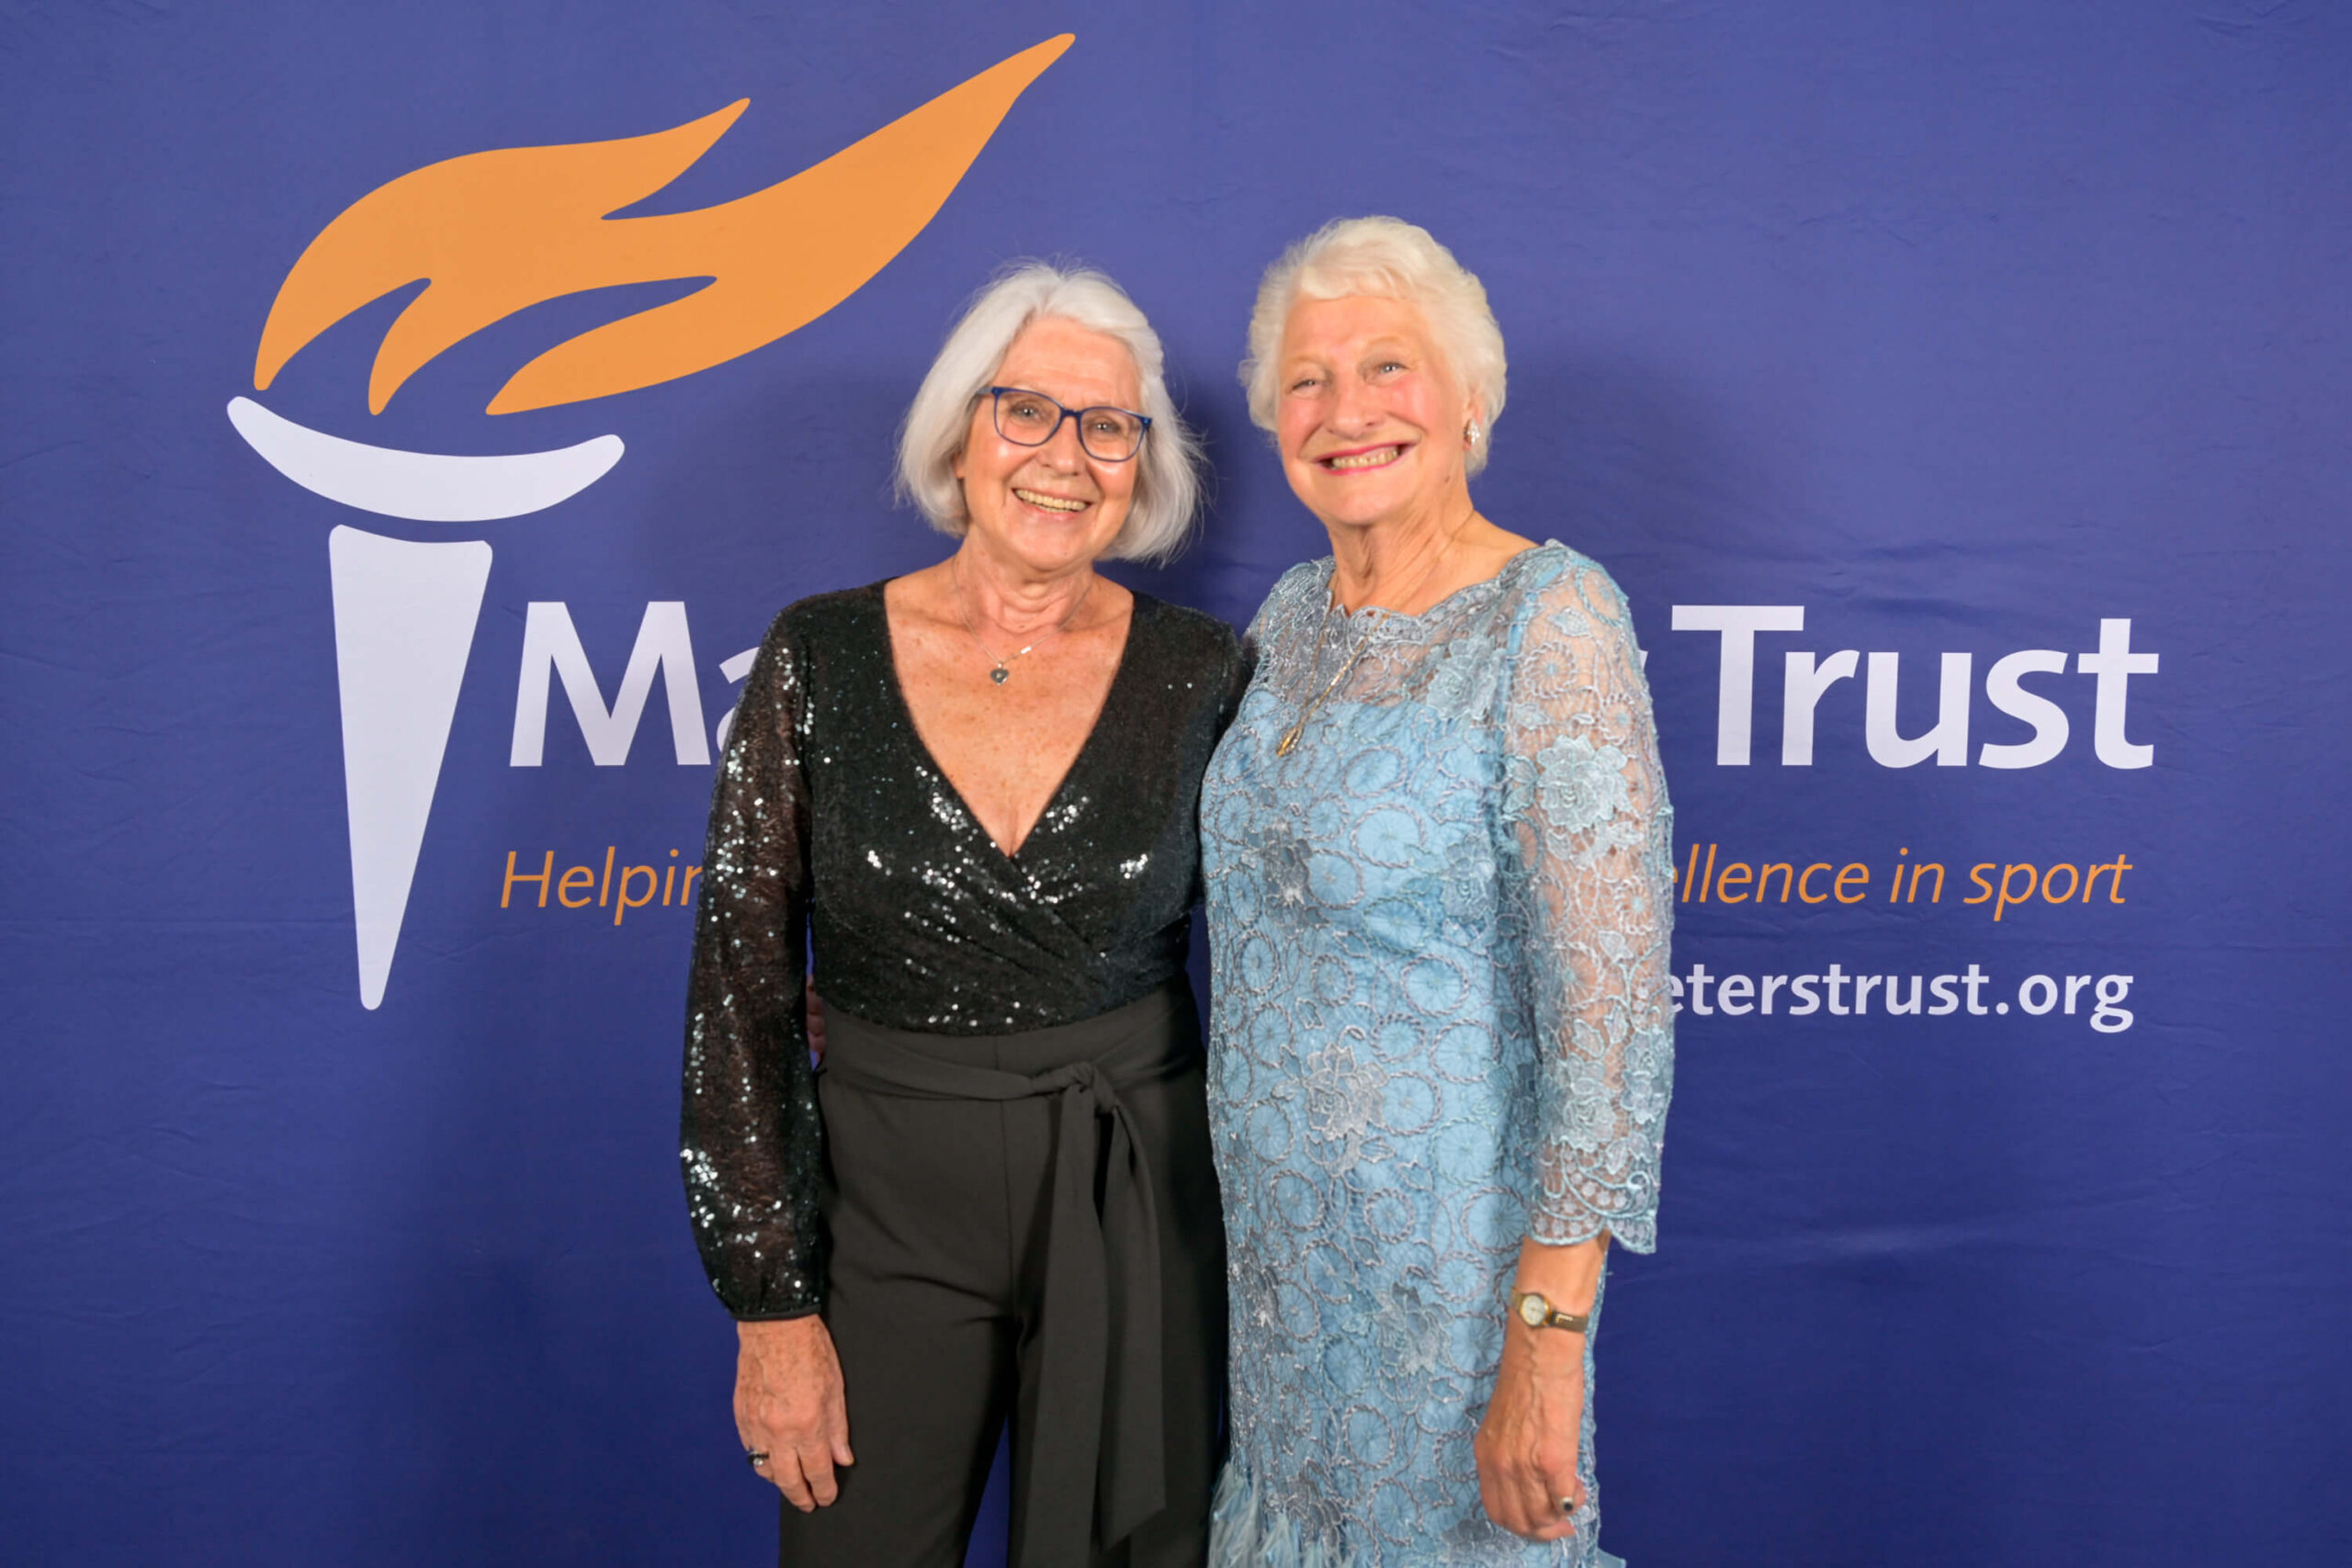 MPT-Ulster-Museum-23-Heide-Rosendahl-and-Lady-Mary-Peters-